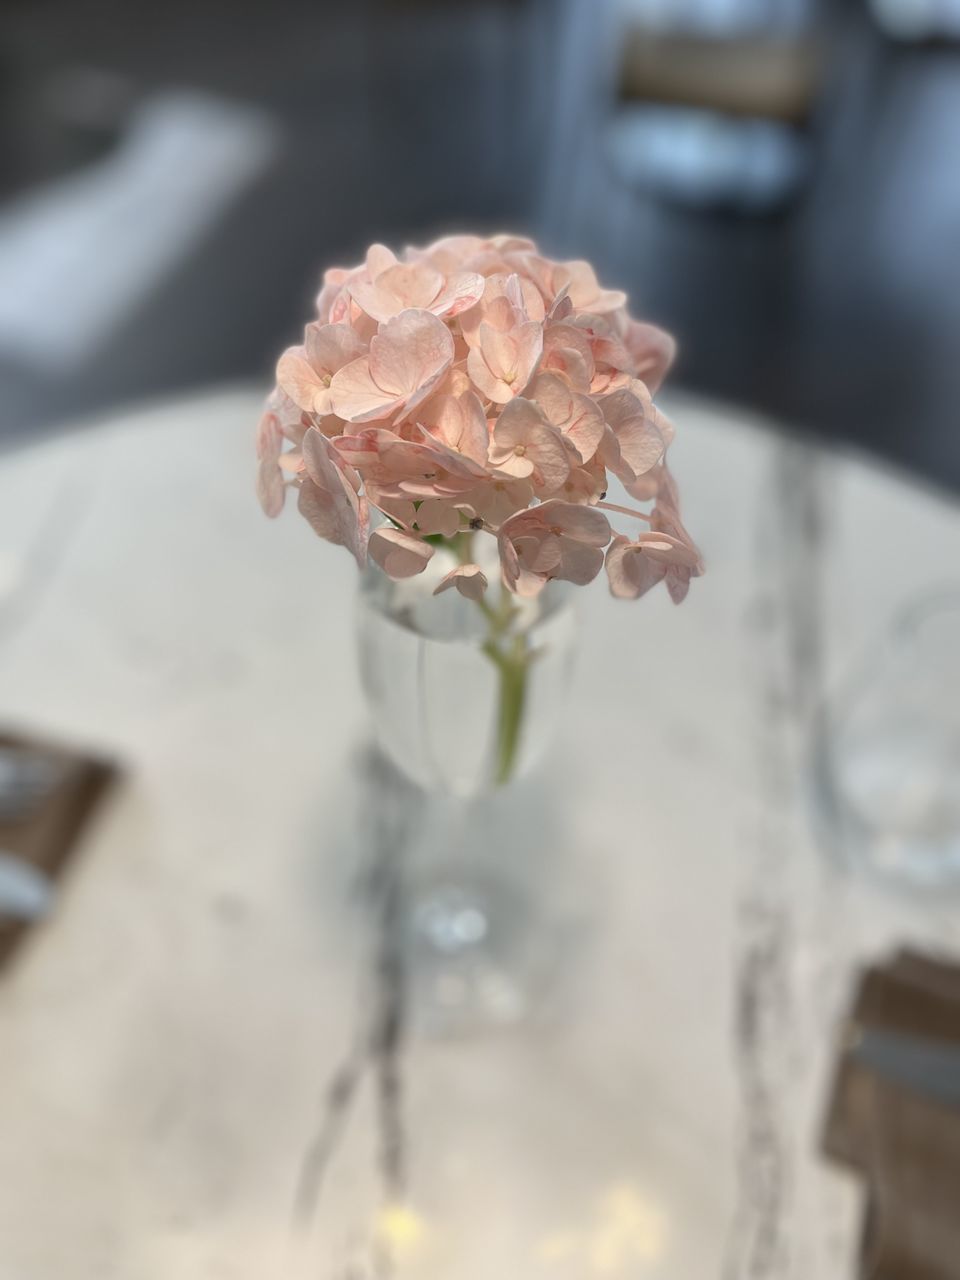 flower, flowering plant, pink, plant, beauty in nature, freshness, close-up, rose, nature, focus on foreground, no people, white, fragility, flower head, table, centrepiece, petal, indoors, selective focus, spring, day, vase, inflorescence, bouquet, still life